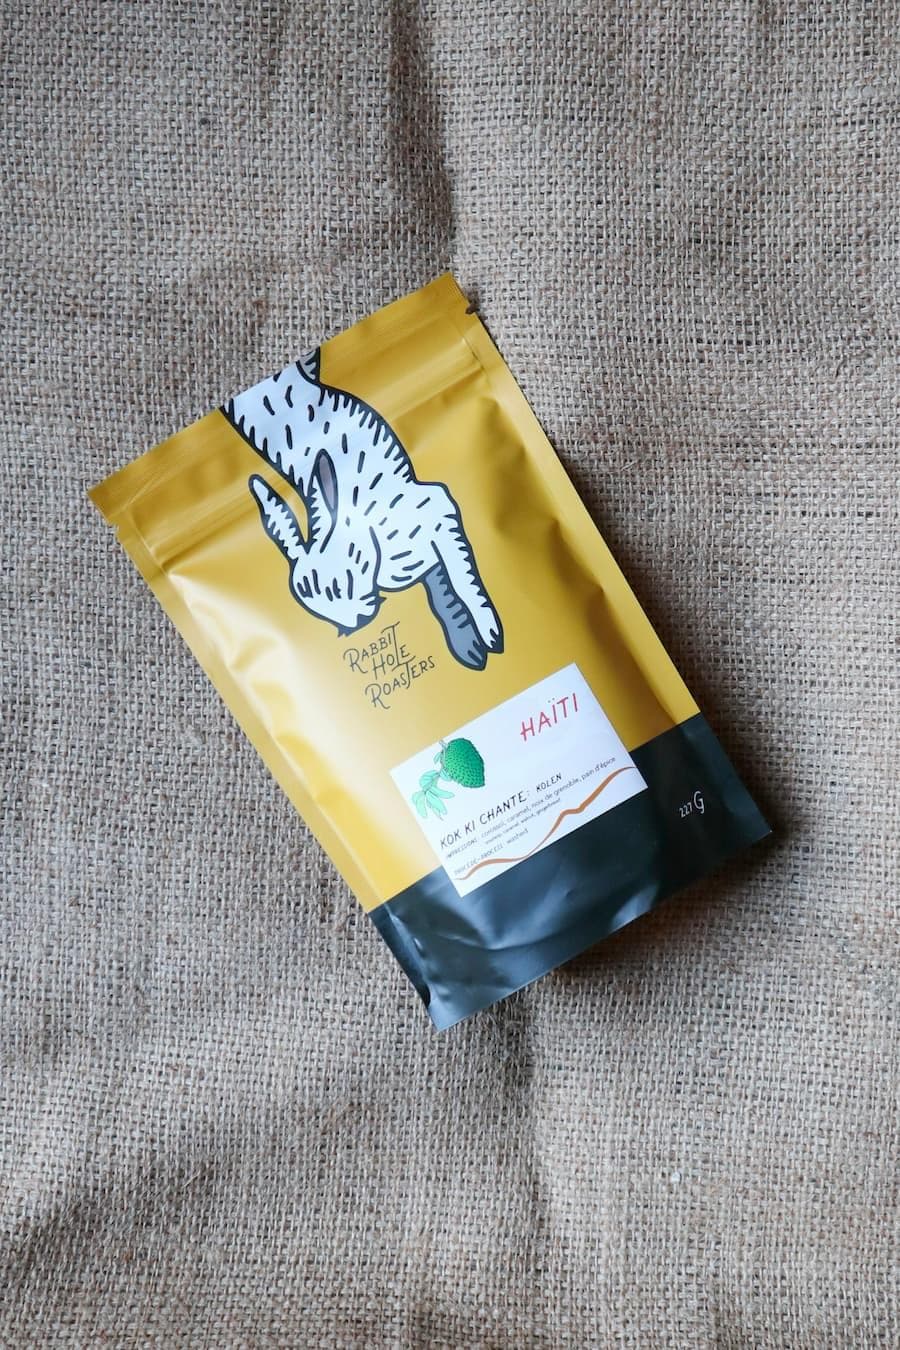 A bag of coffee from Rabbit Hole Roasters